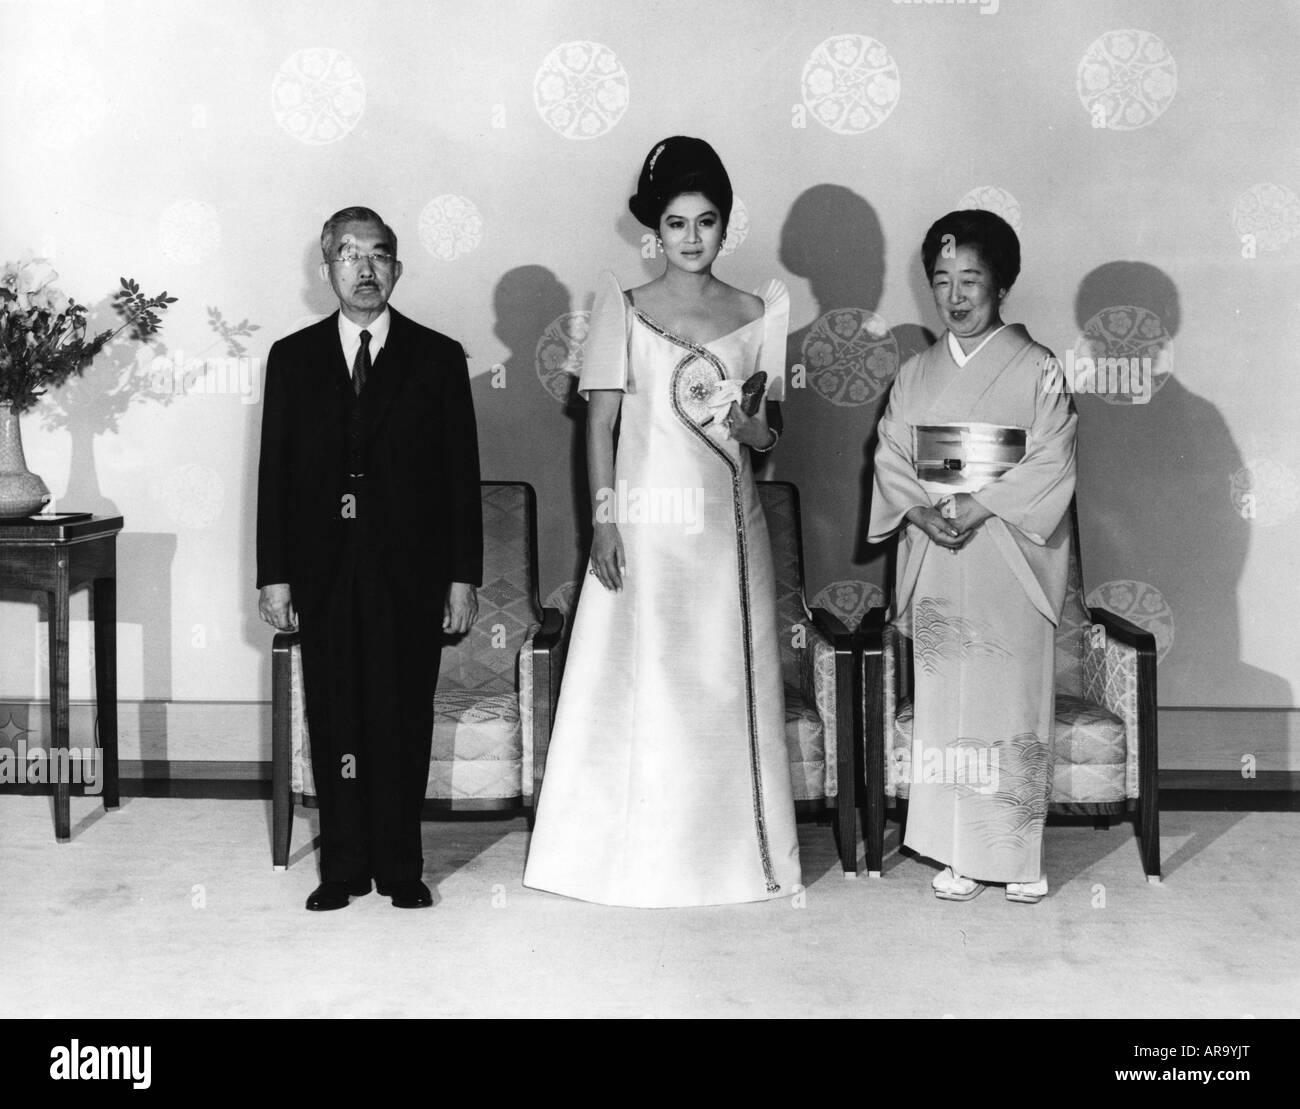 Hirohito, 29.4.1901 - 7.1.1989, Emperor (tenno) of Japan 25.12.1926 - 7.1.1989, with the Philippines First Lady Imelda Marcos and his wife Empress Kojun, full length, Imperial Palace, Japan, 19.6.1970, Stock Photo